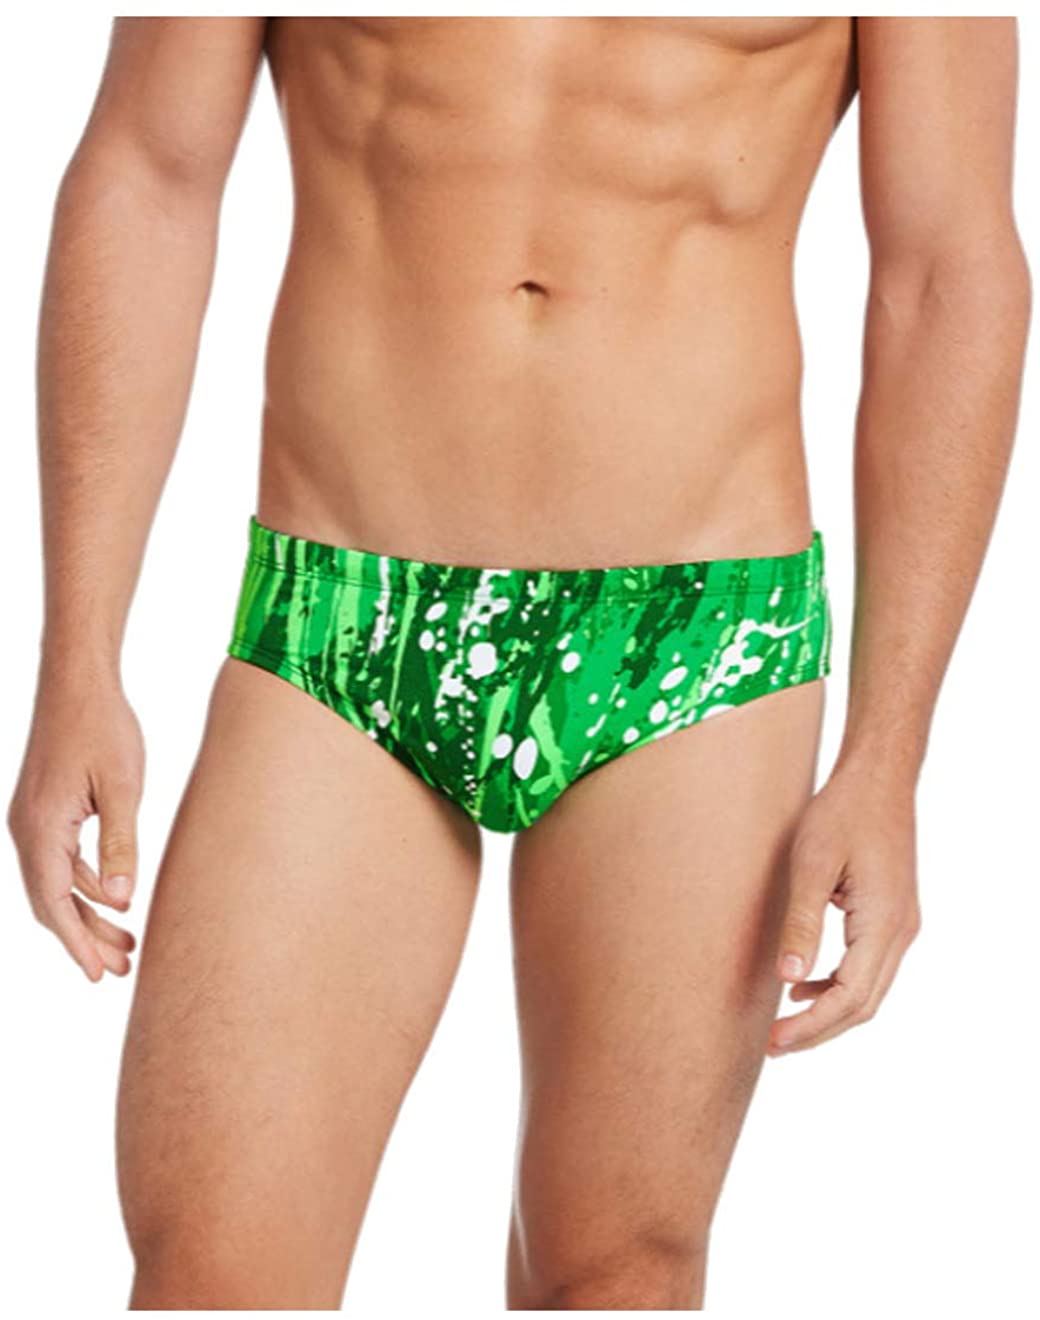 Nike Swim Men's Brief in Court Green color from the front